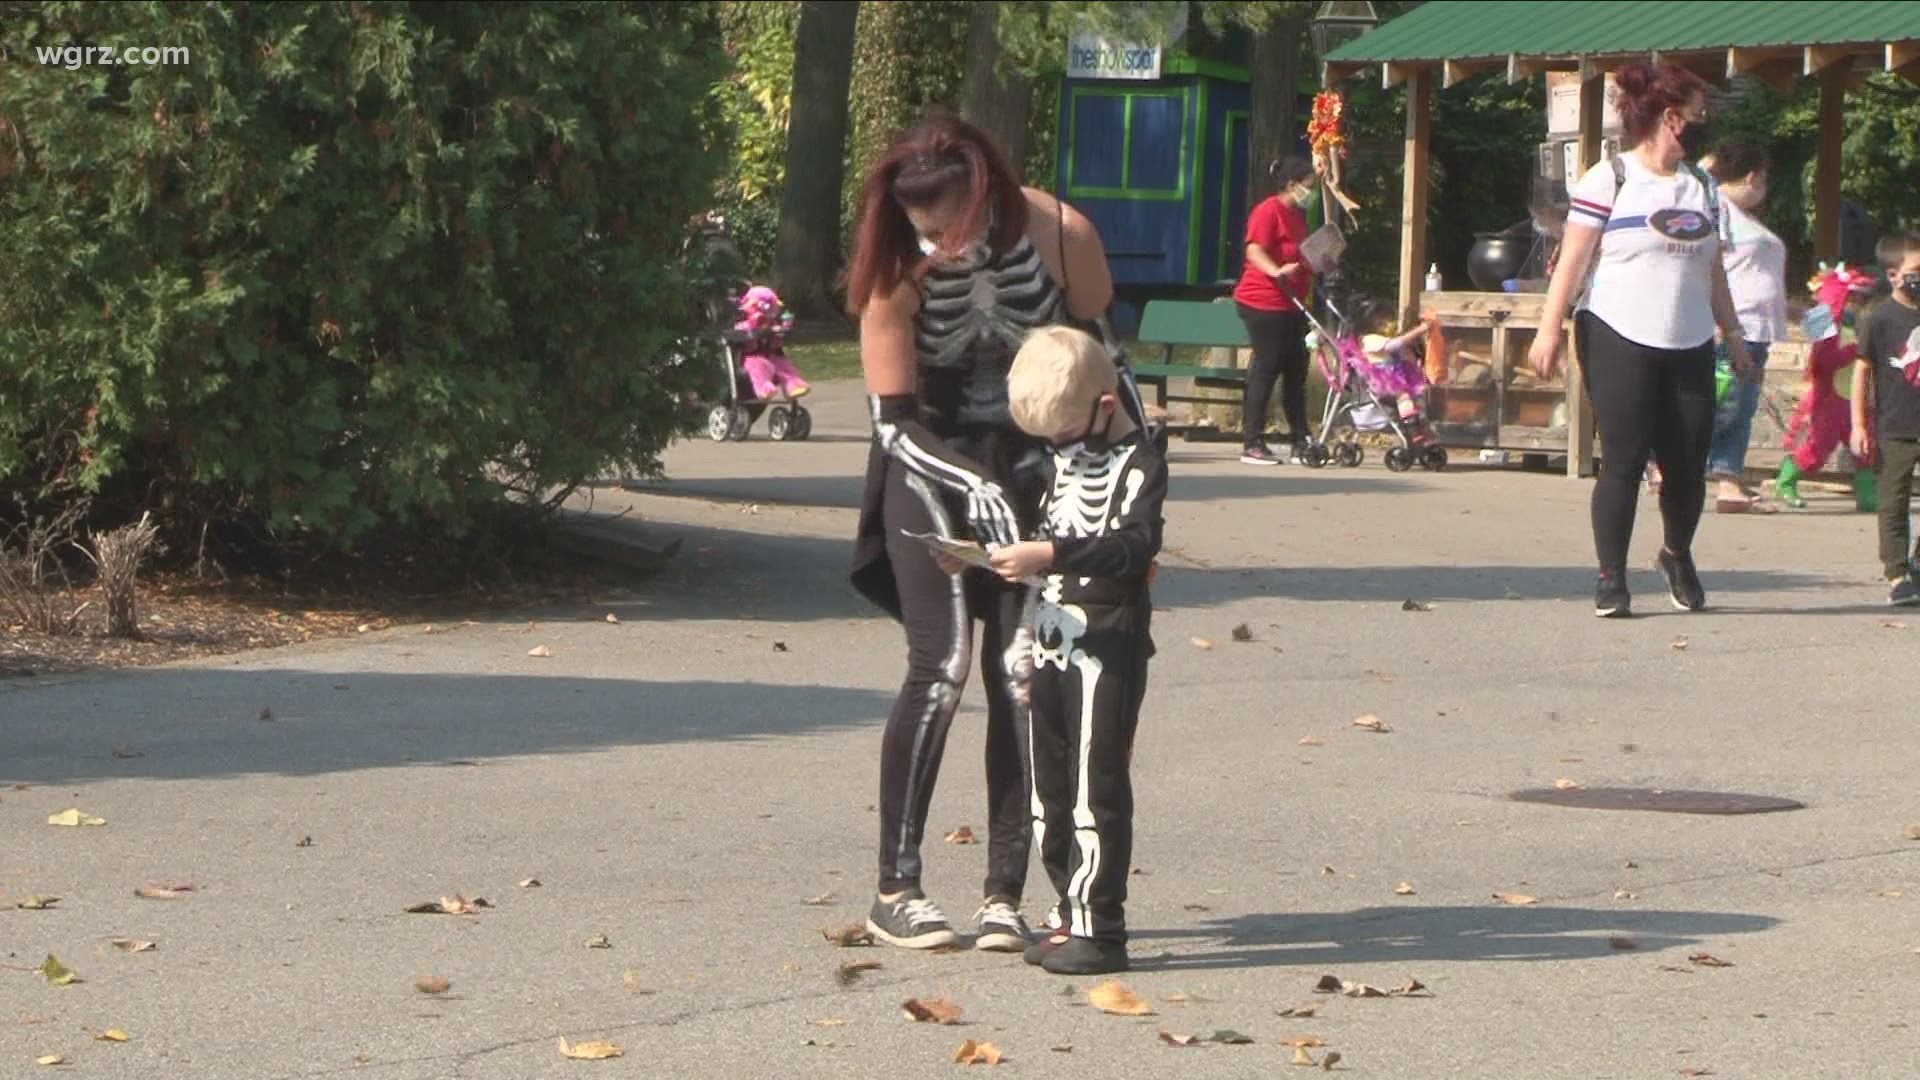 When it comes to trick-or-treating, there's another option available: you can go to the Buffalo Zoo.